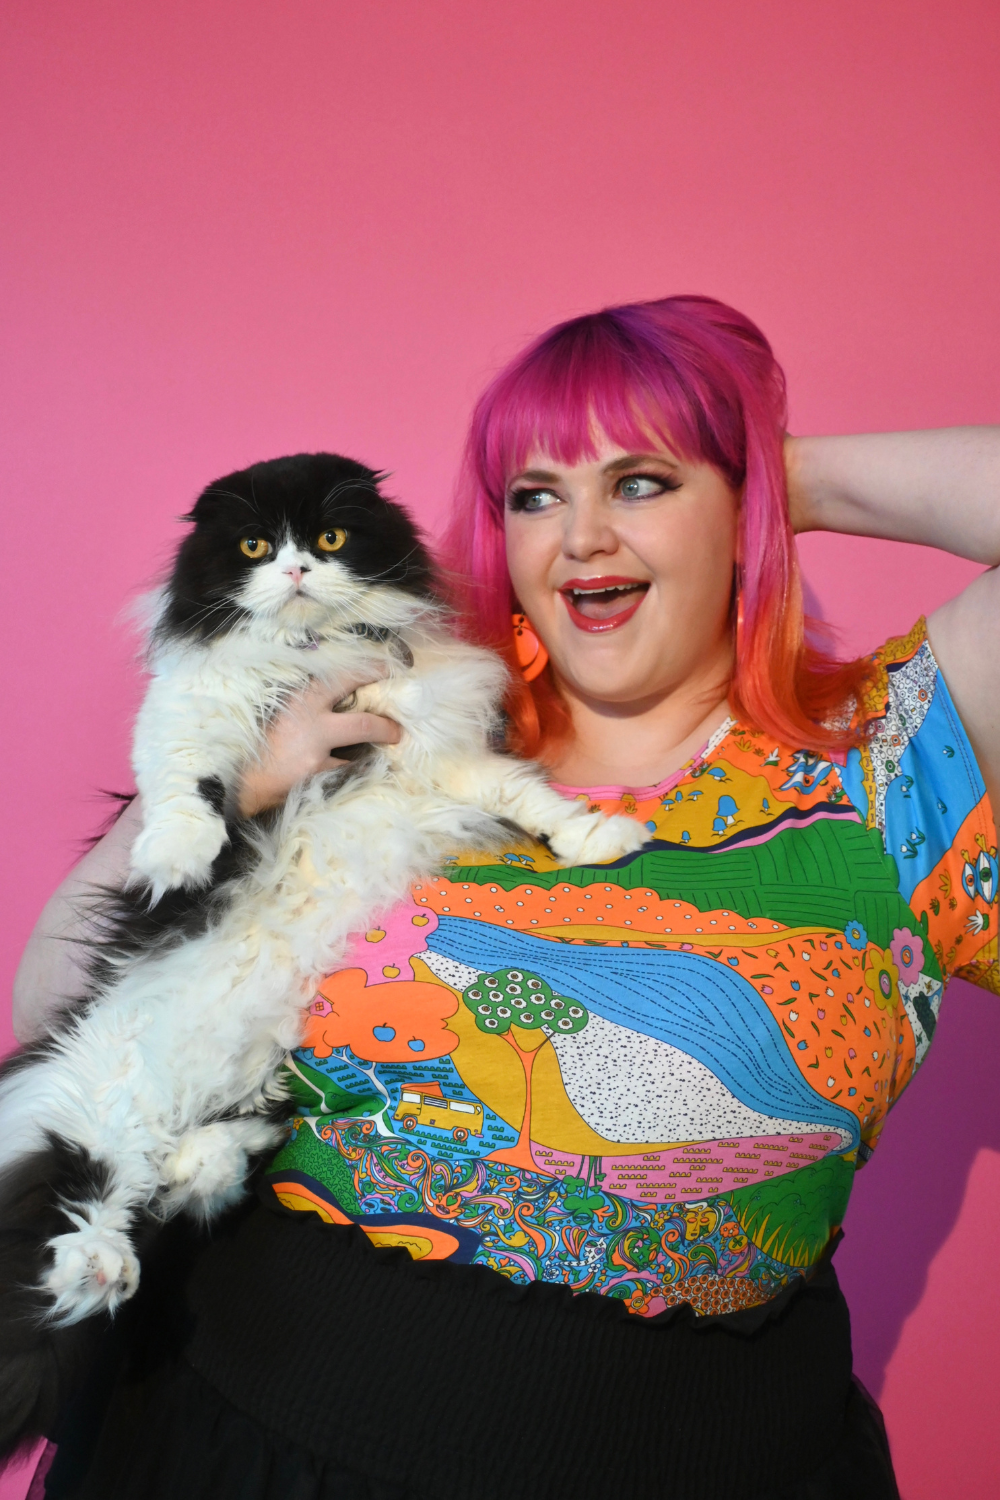 Pink haired model holding cat wearing shirt with landscape graphic in multicolor